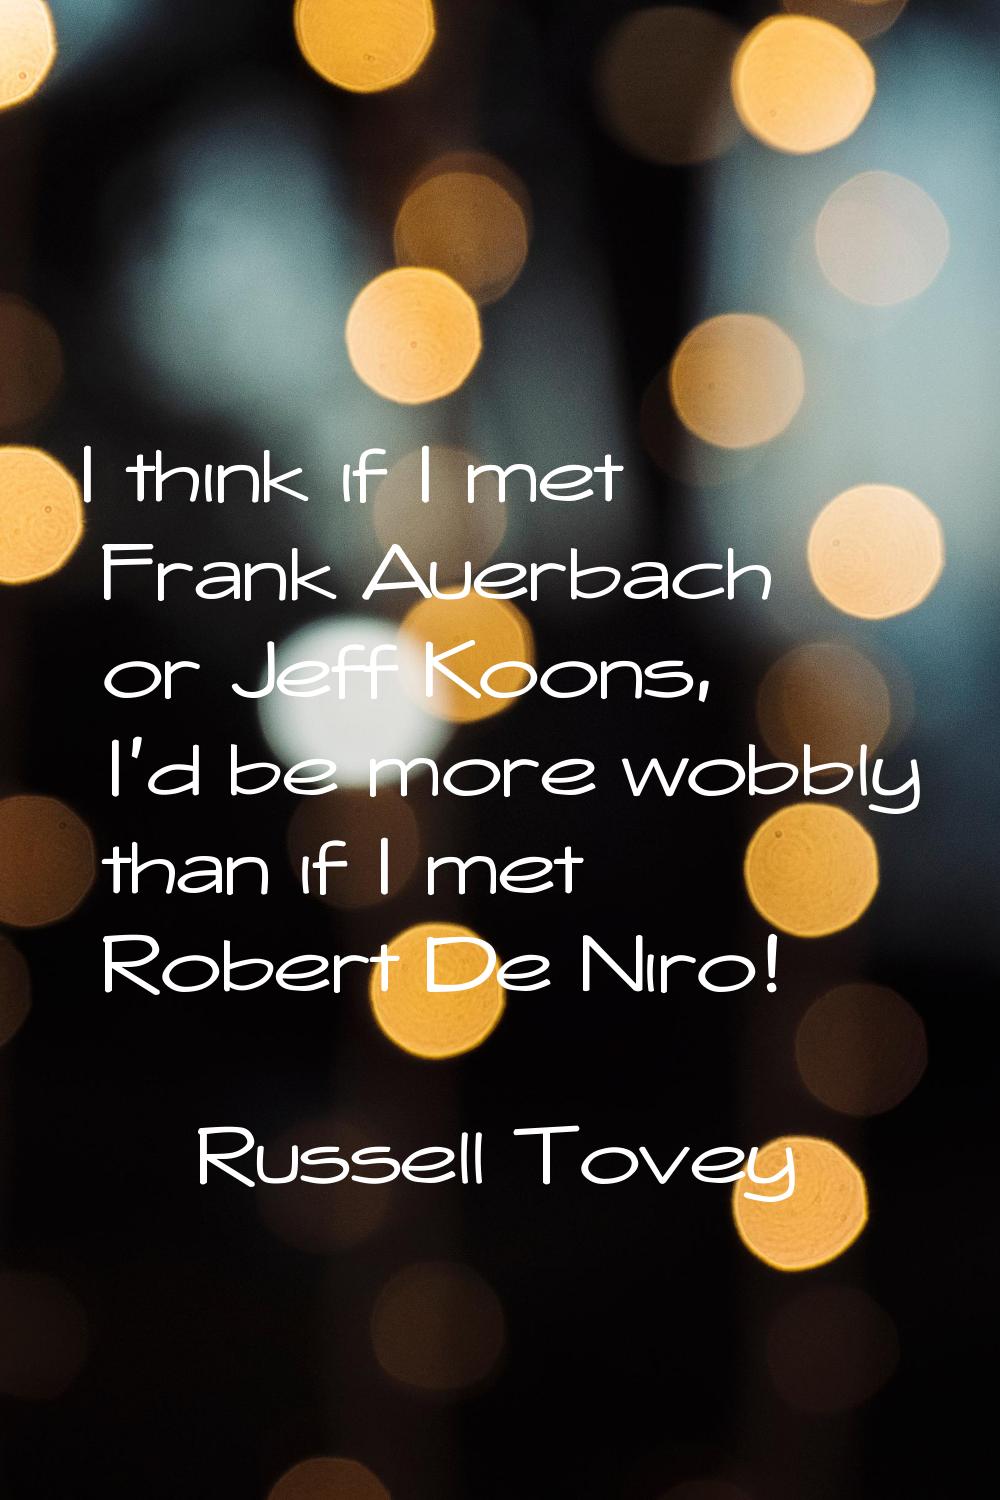 I think if I met Frank Auerbach or Jeff Koons, I'd be more wobbly than if I met Robert De Niro!